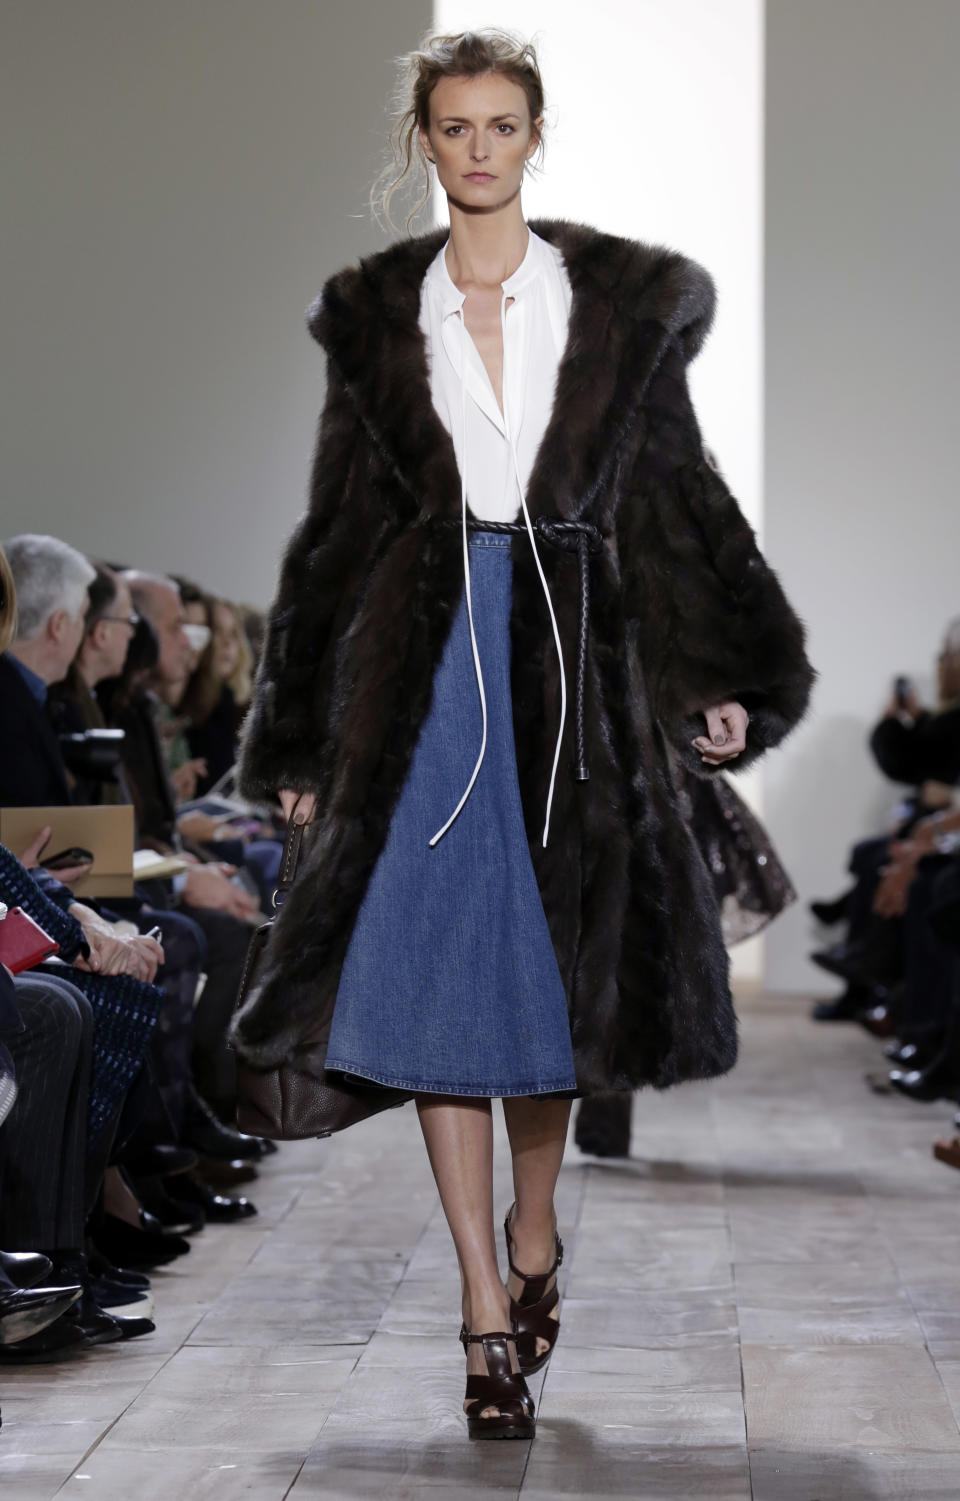 The Michael Kors Fall 2014 collection is modeled during Fashion Week in New York, Wednesday, Feb. 12, 2014. (AP Photo/Richard Drew)